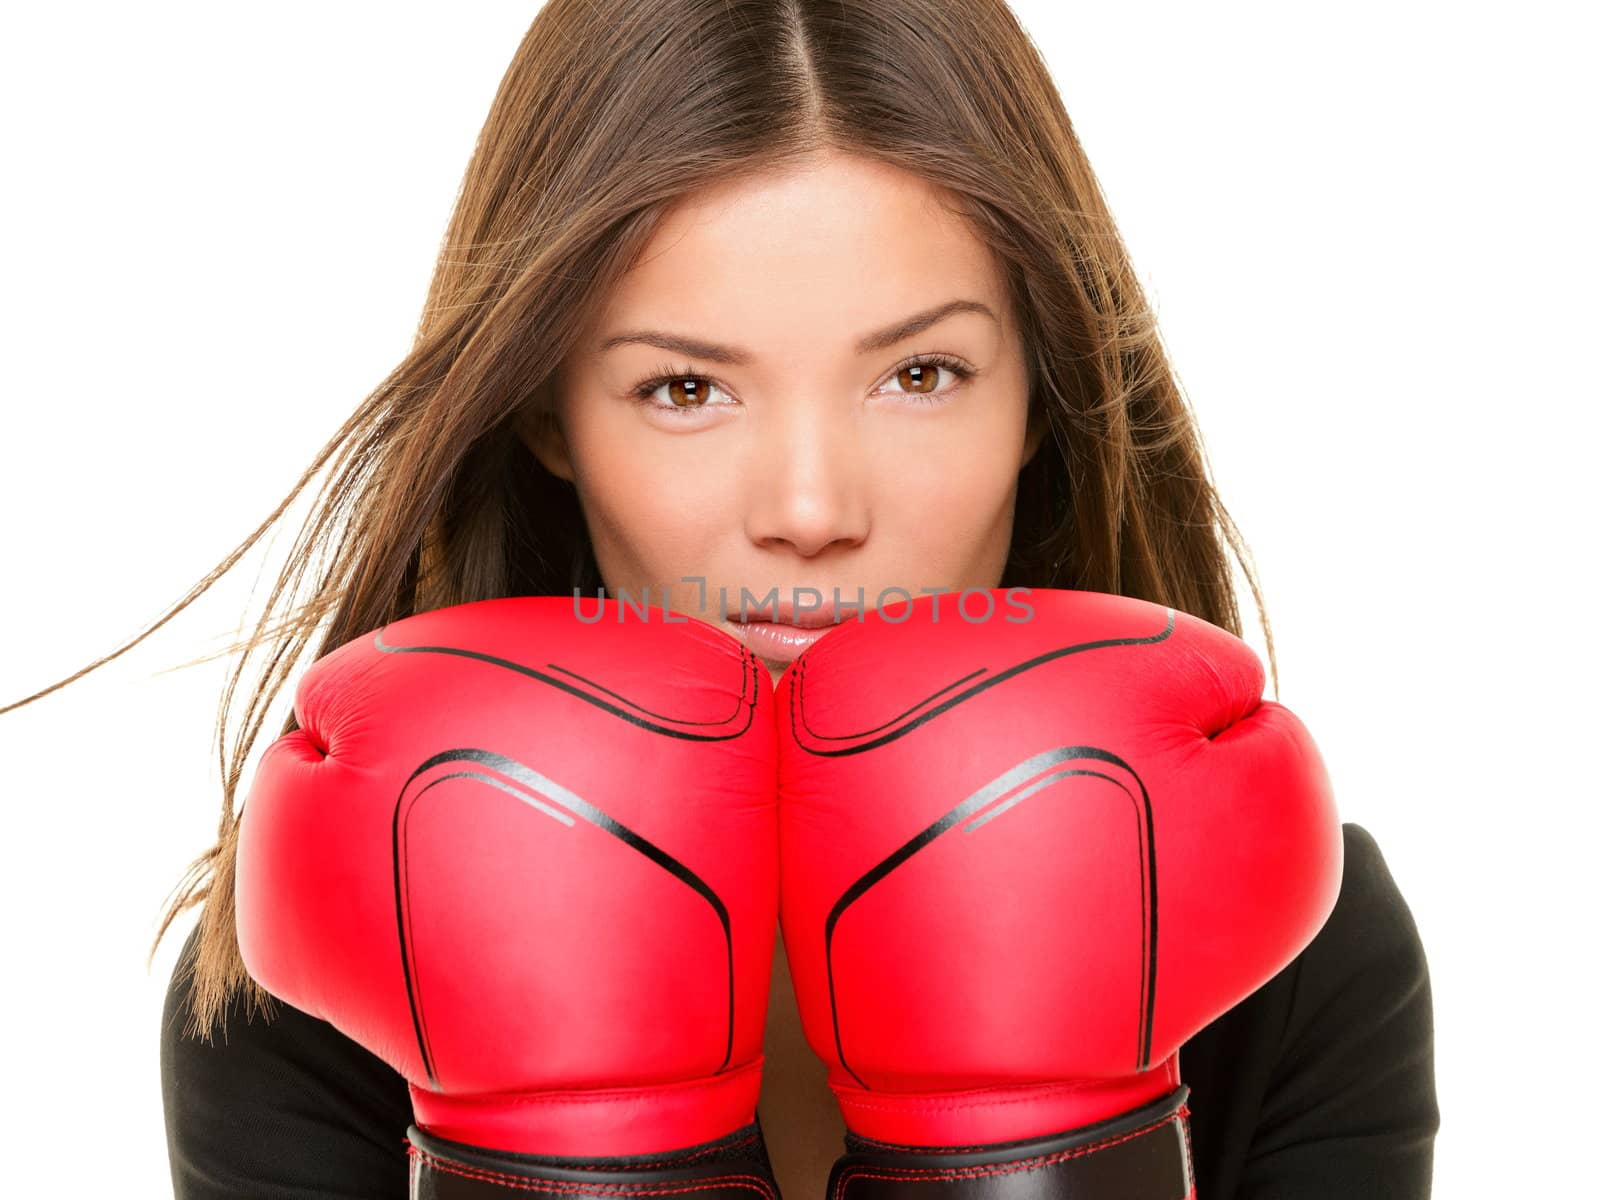 Businesswoman wearing boxing gloves ready to fight. Strength, power or competition concept image of beautiful young mixed race Chinese Asian / Caucasian business woman isolated on white background.